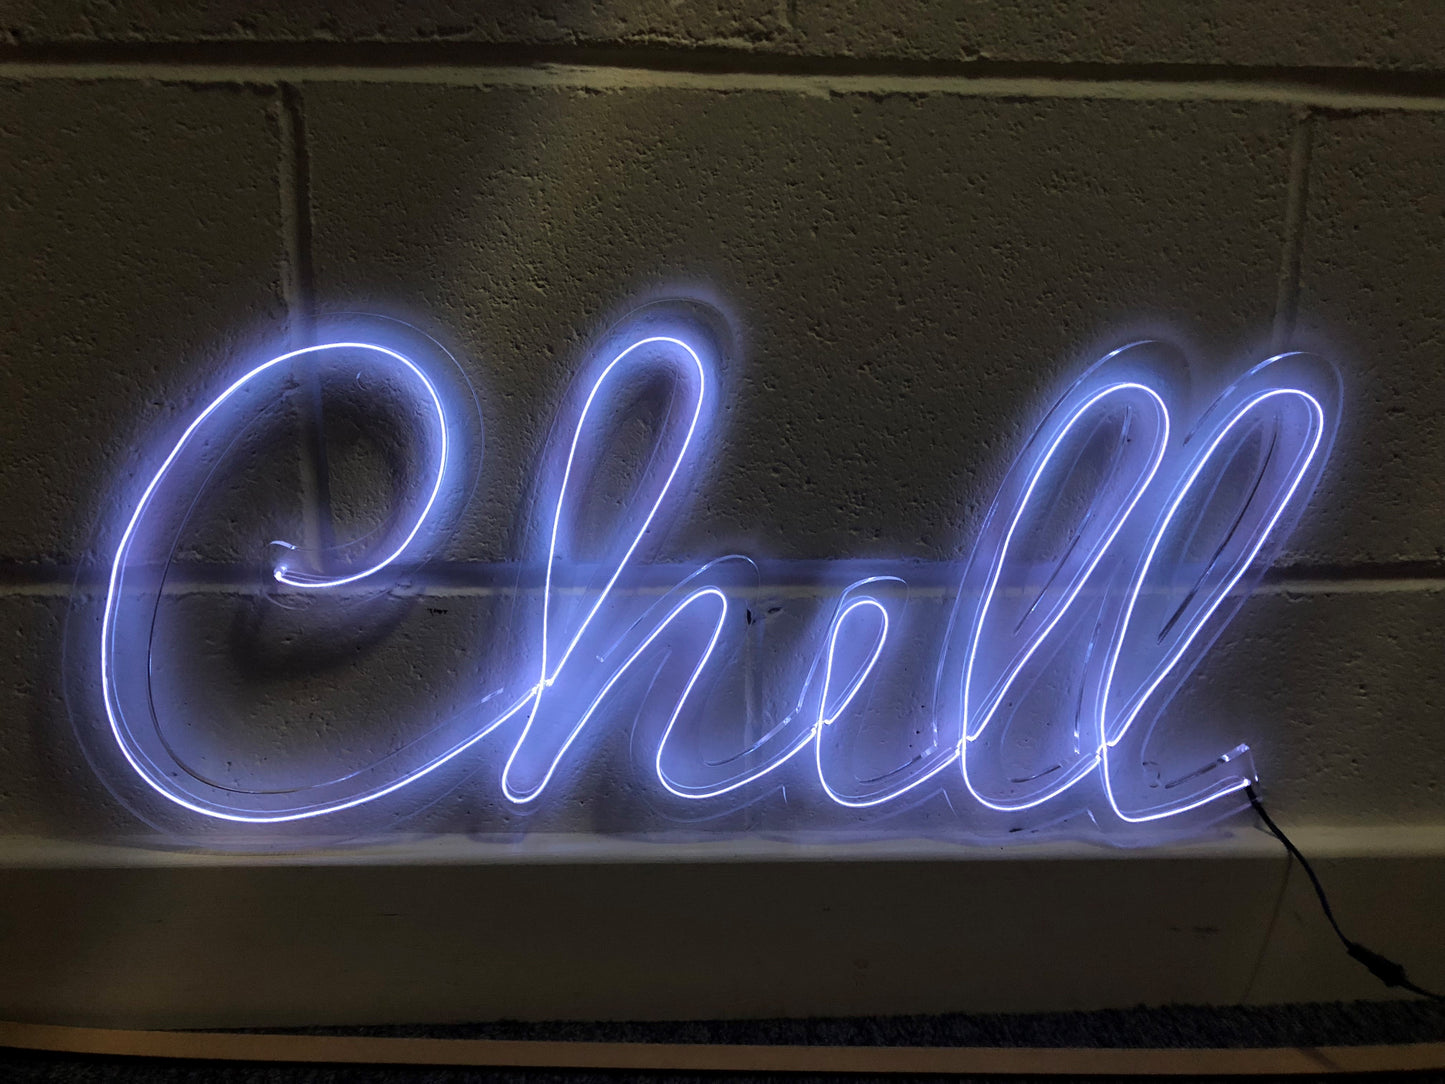 Chill Neon Sign